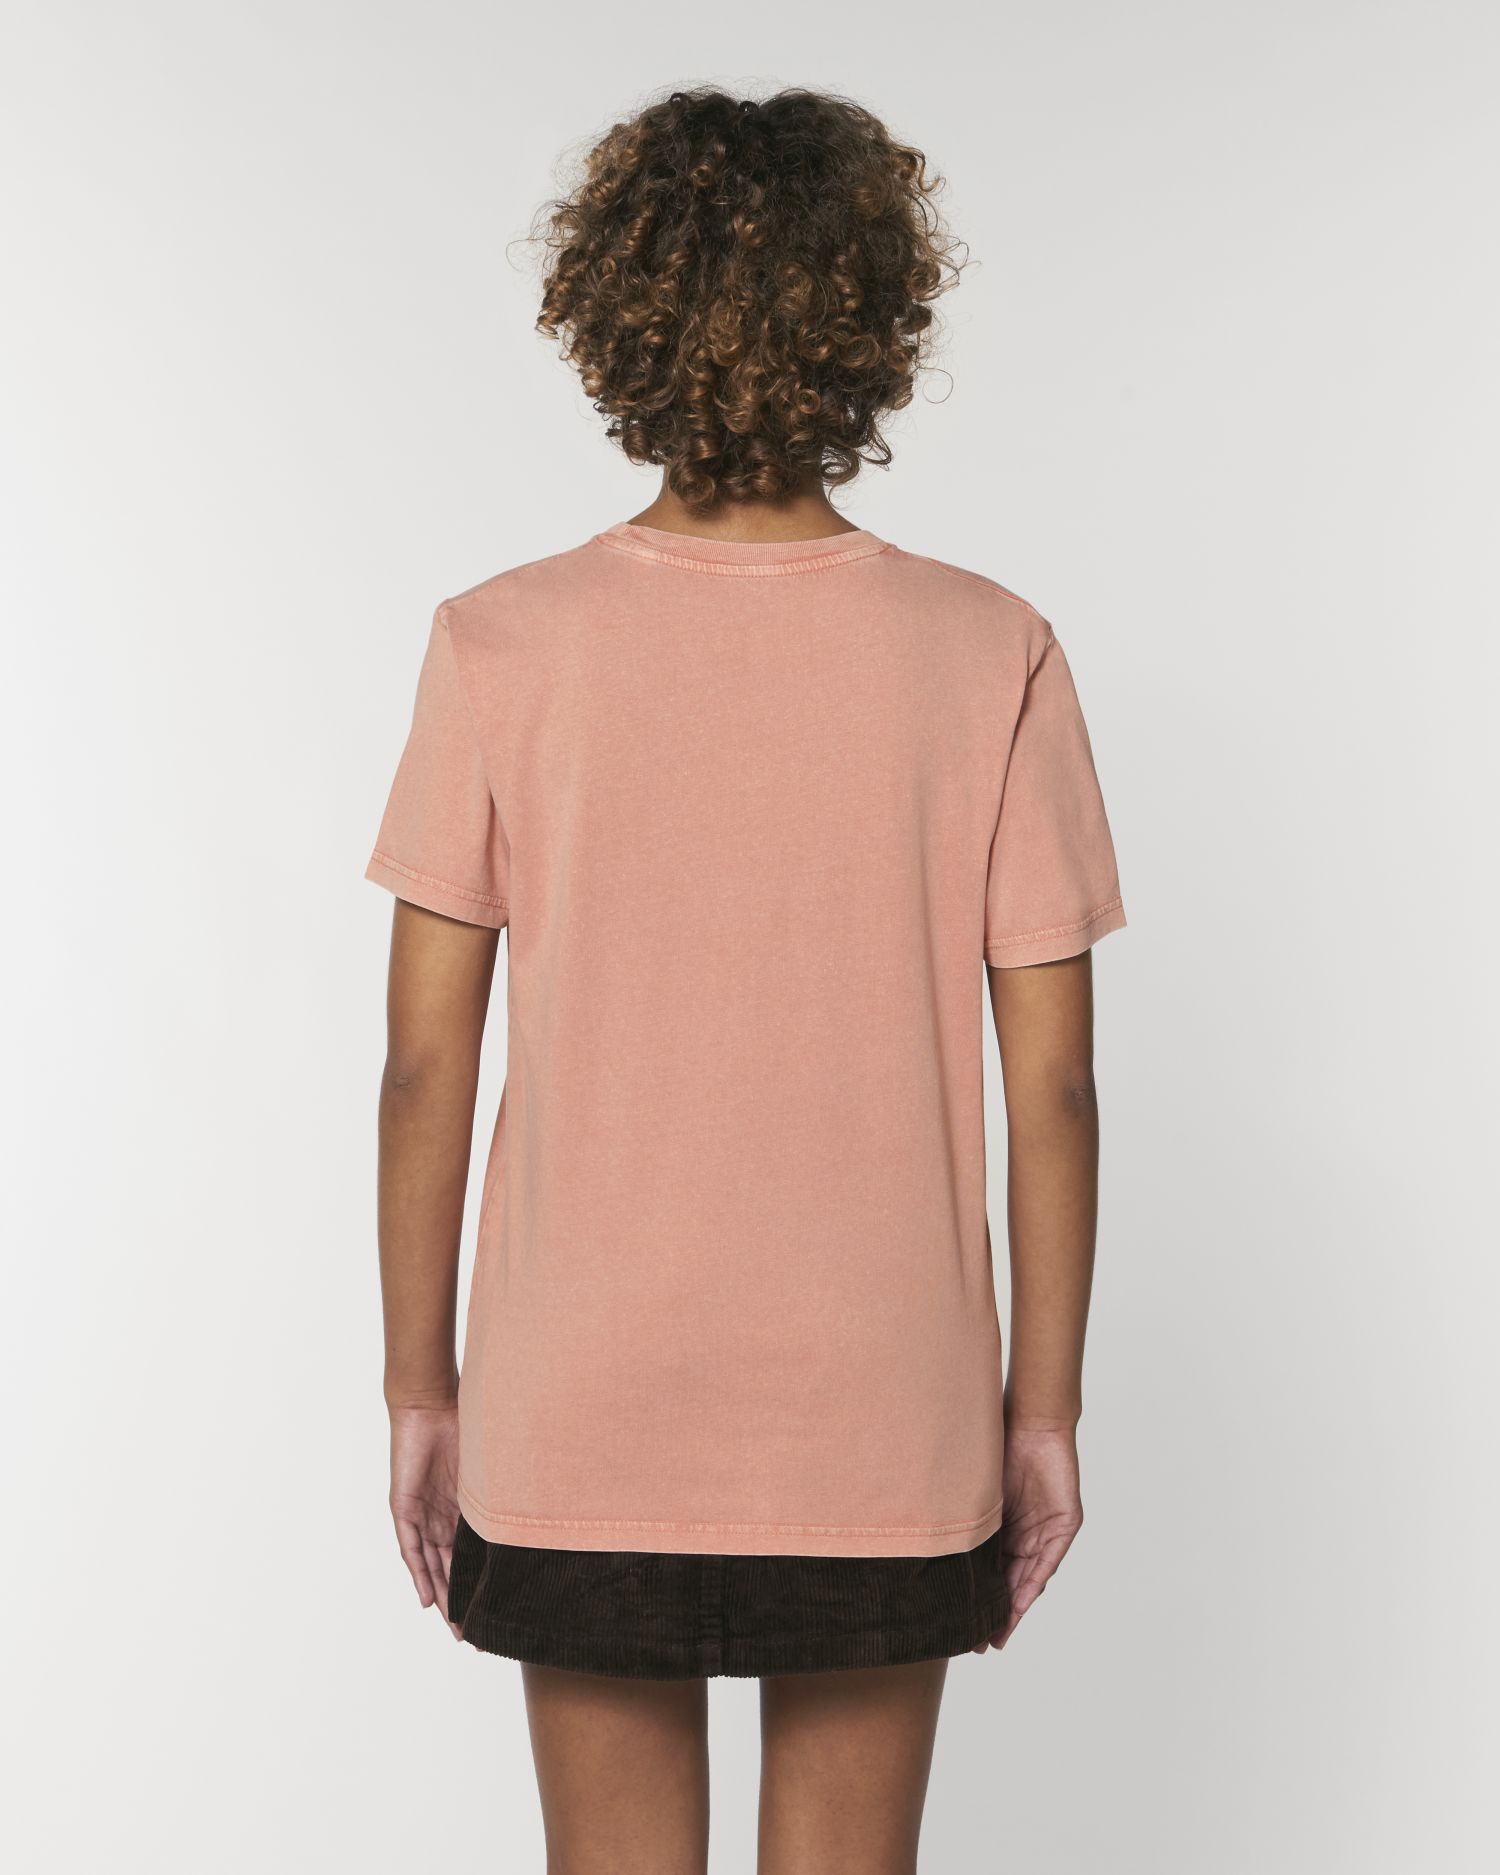 T-Shirt Creator Vintage in Farbe G. Dyed Aged Rose Clay